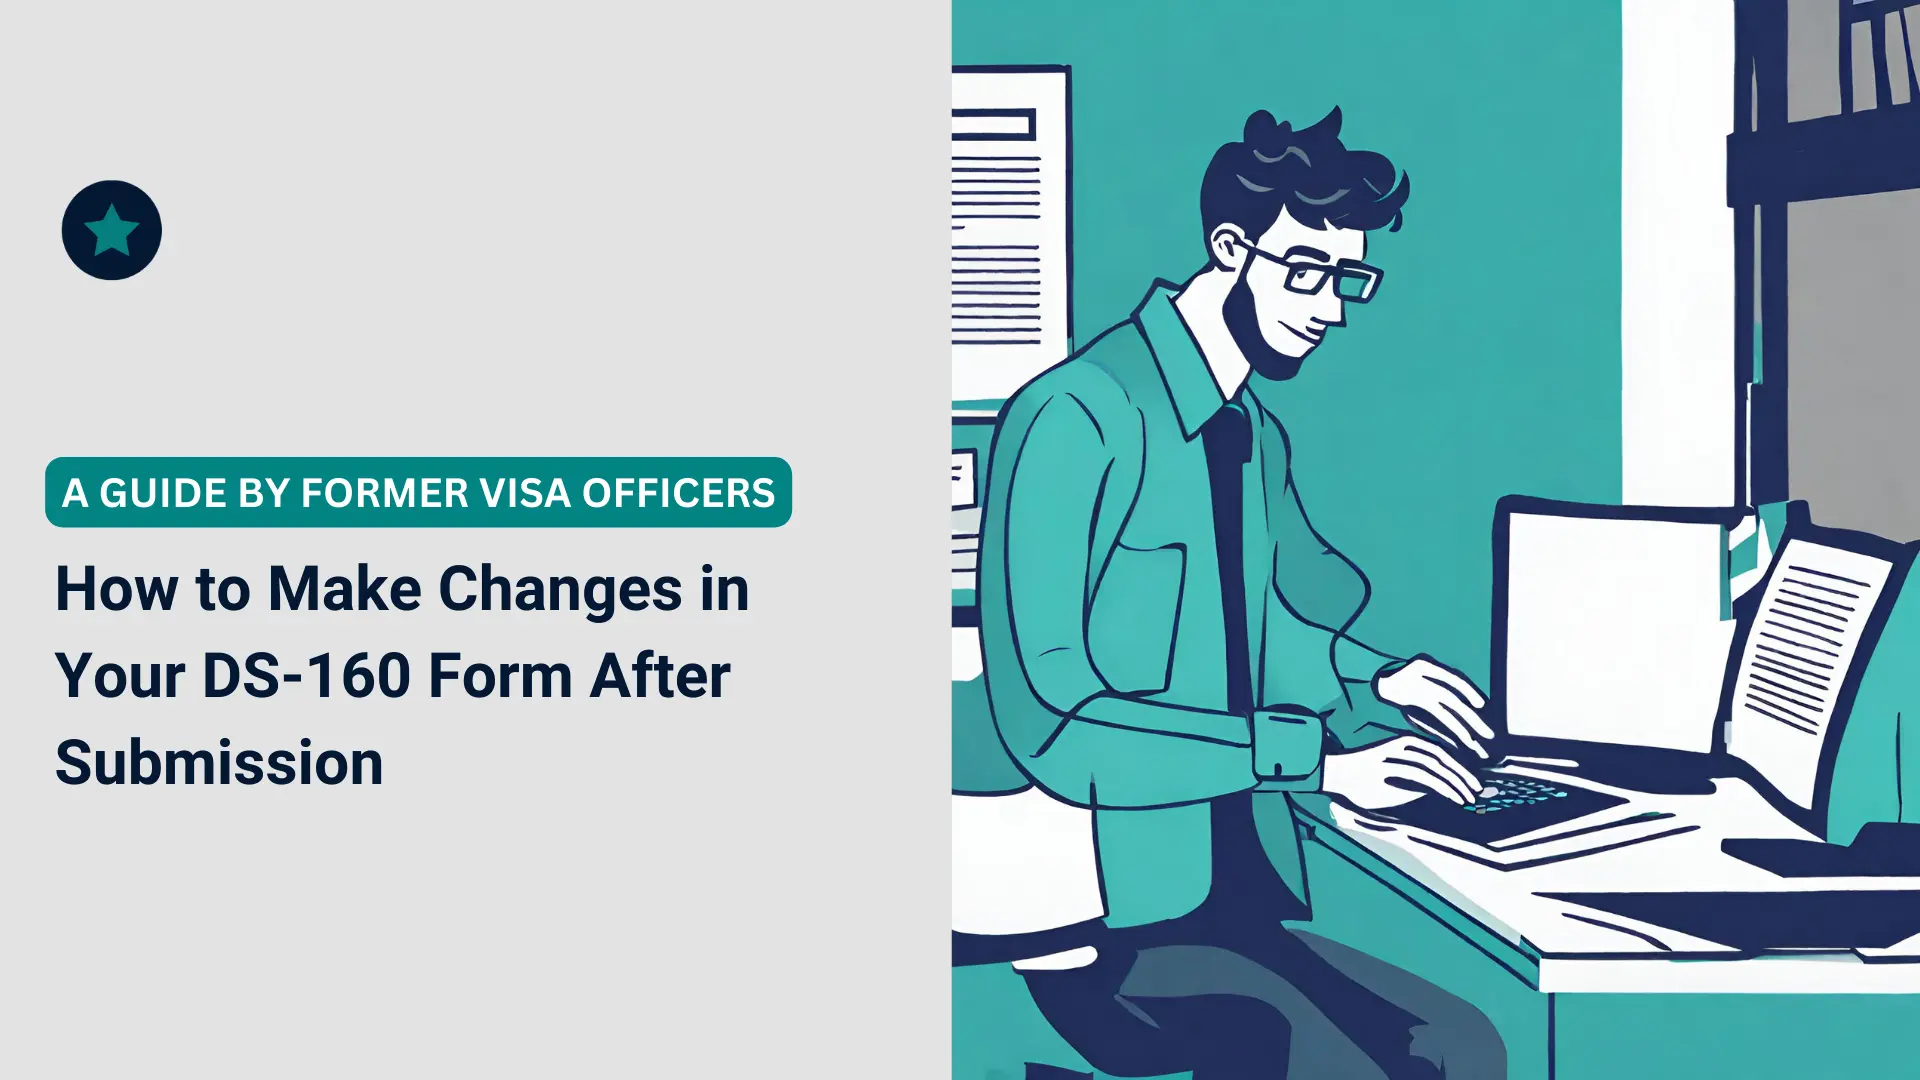 How to Make Changes in Your DS-160 Form